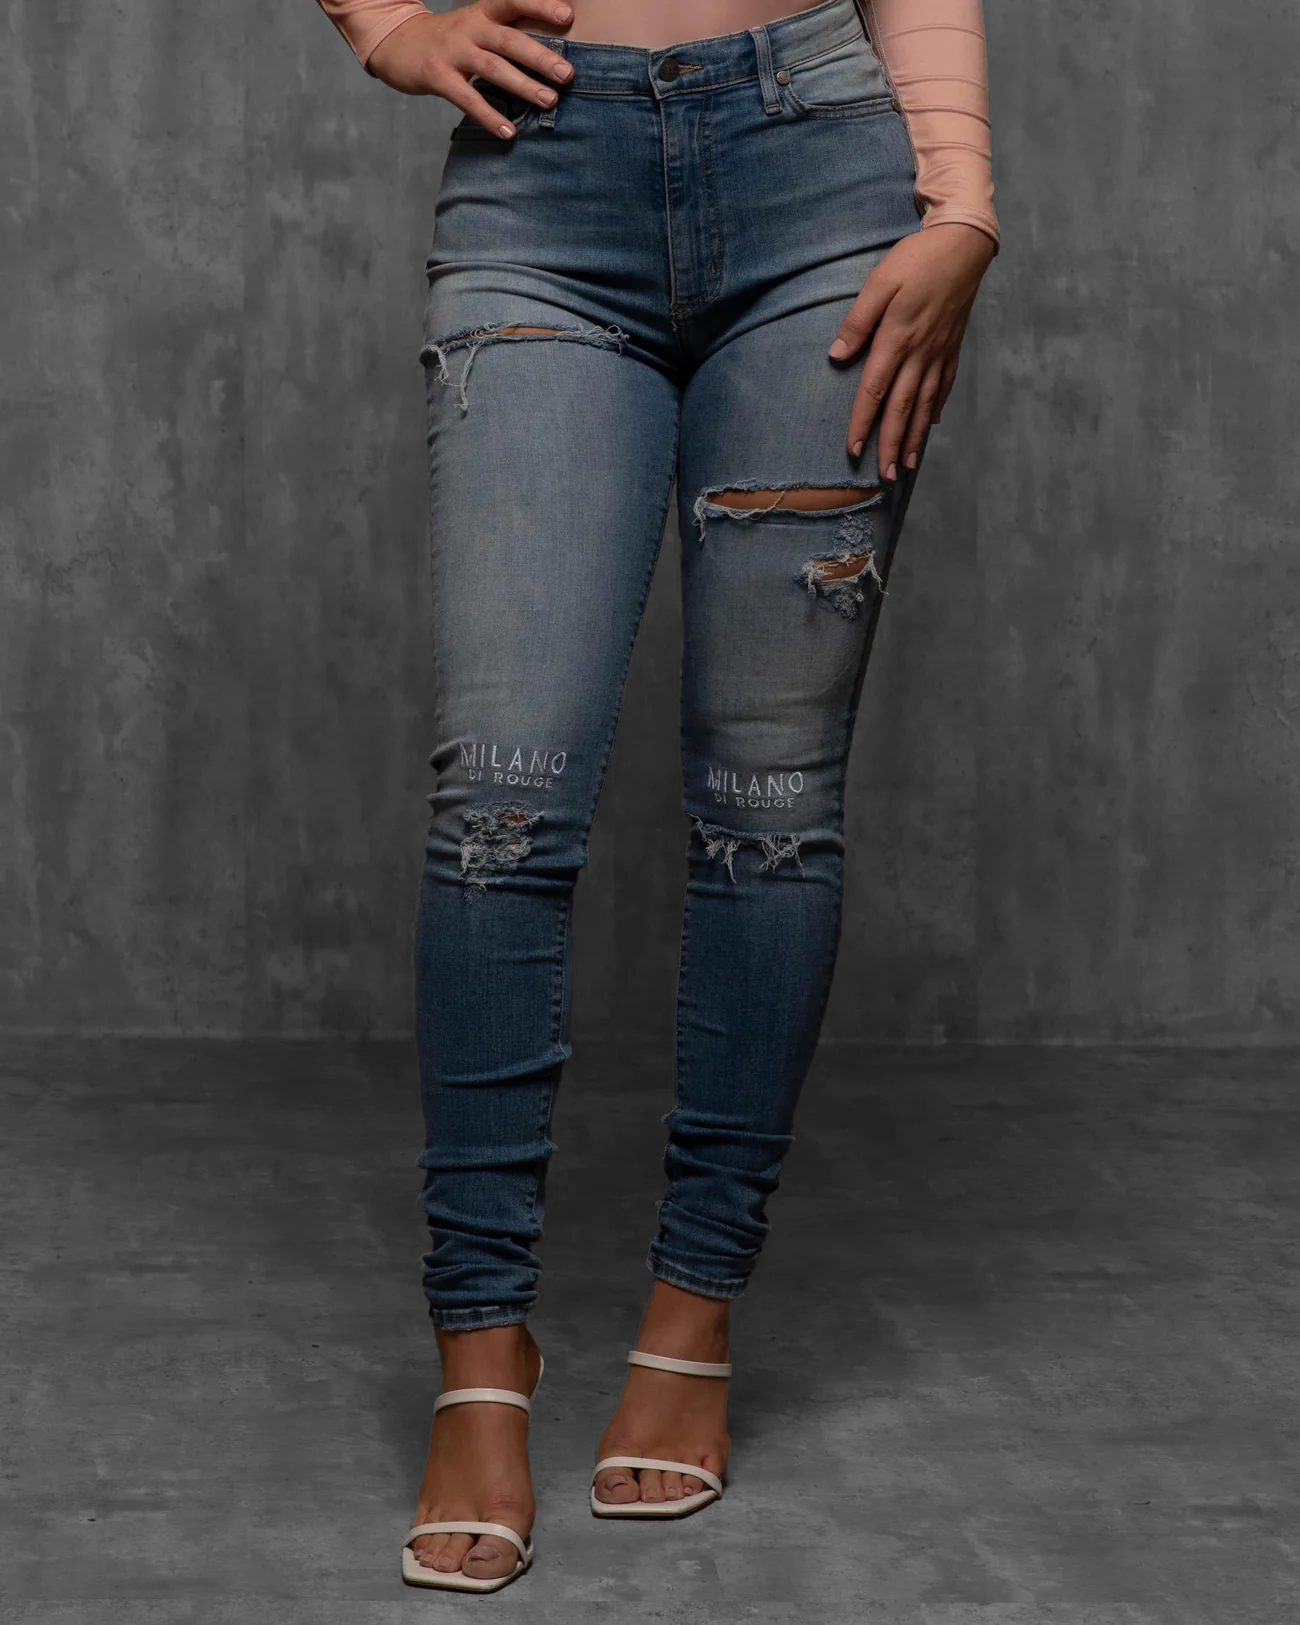 Women Try One-Size-Fits-All Jeans, Women Try One-Size-Fits-All Jeans, By  SOML